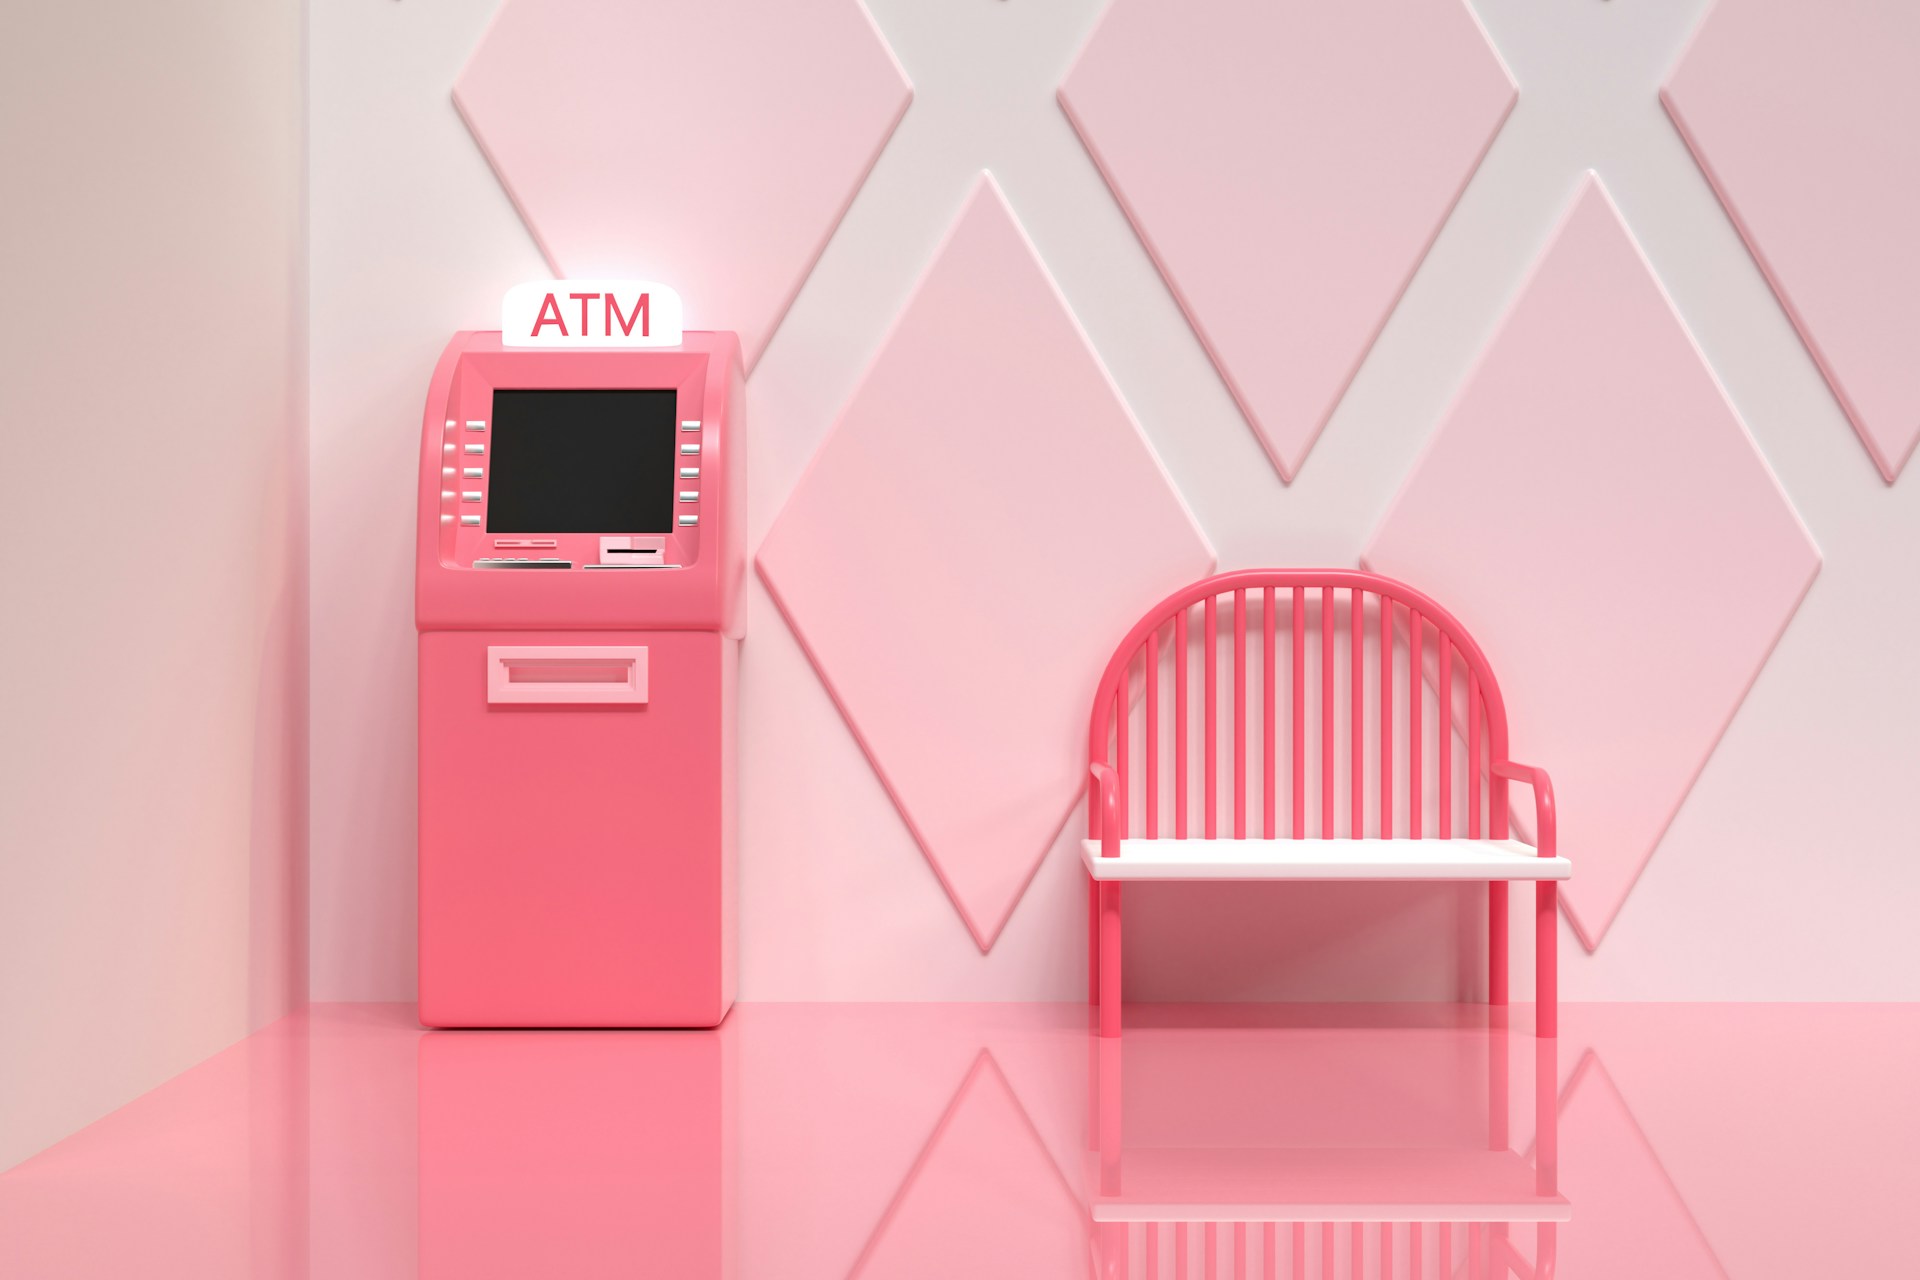 A pink model of an ATM machine next to a pink model bench